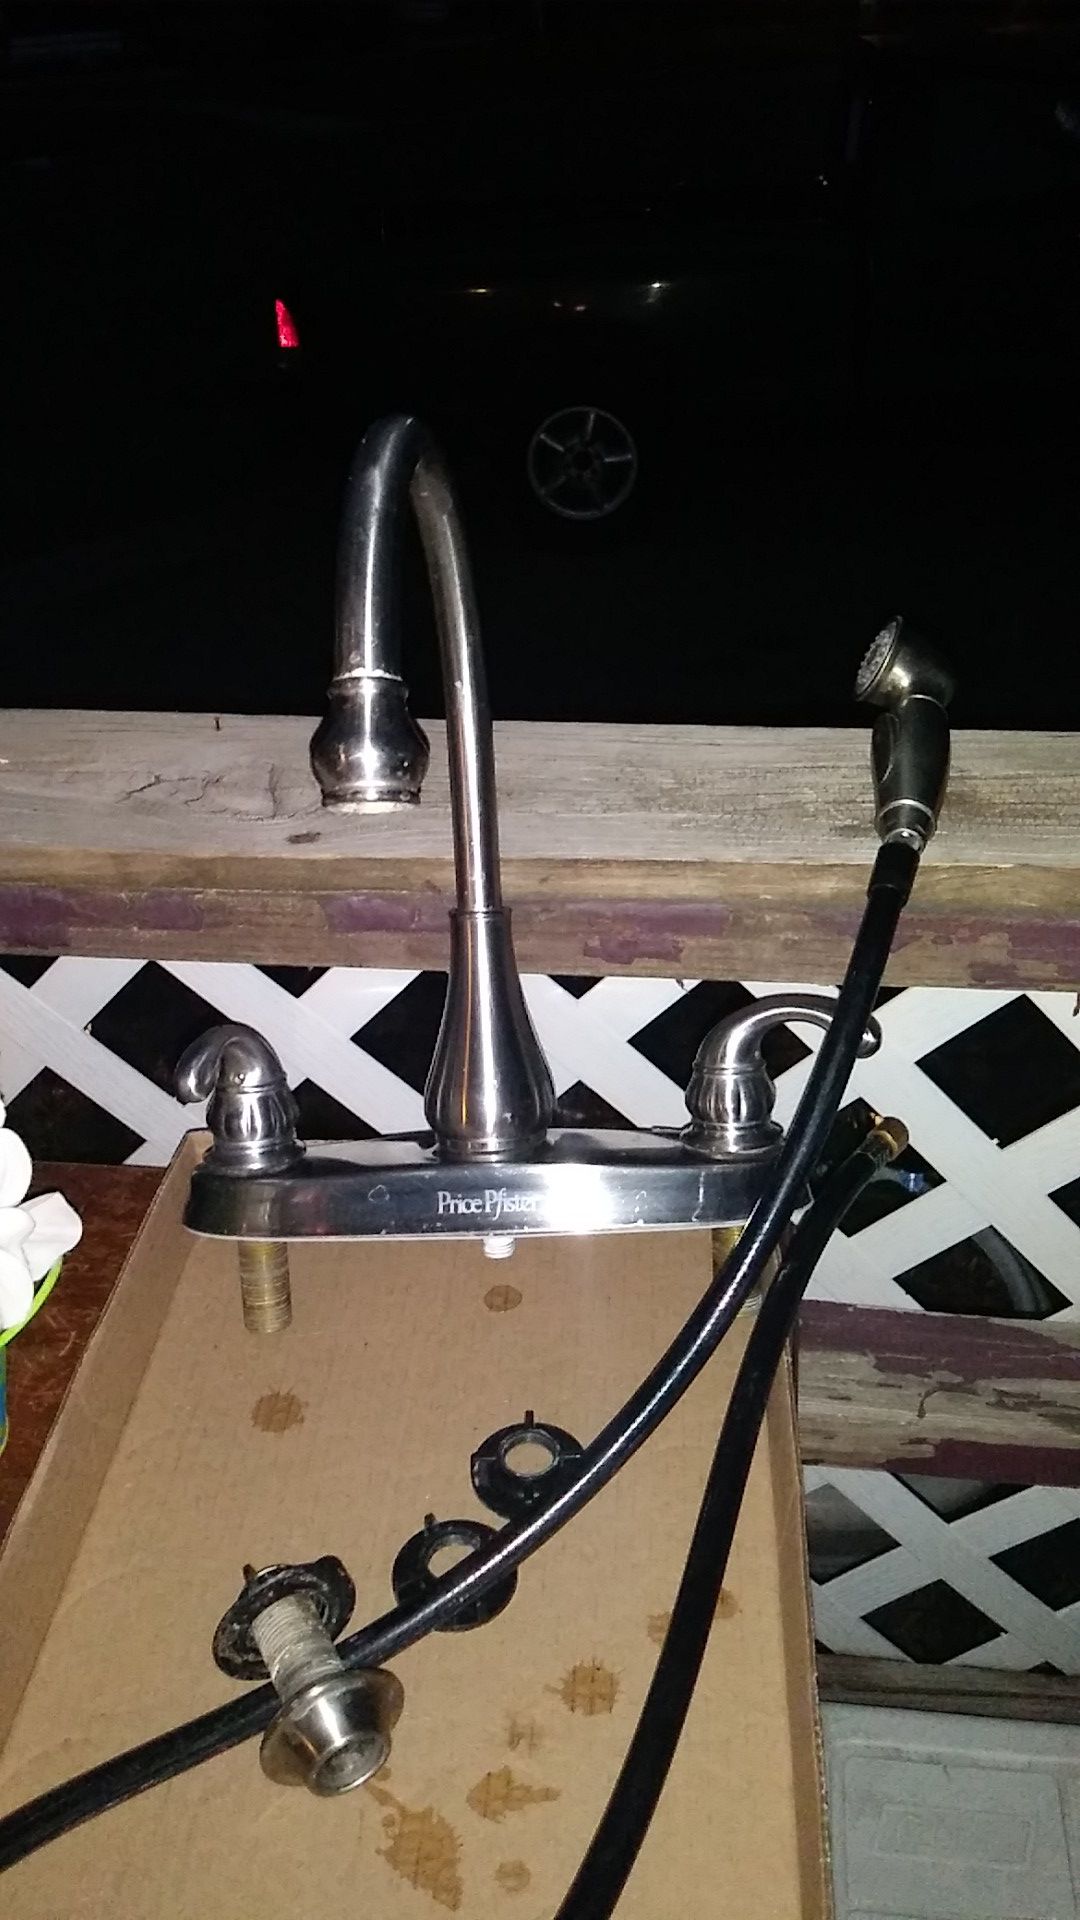 Price Pfister Platinum finish kitchen faucet with sprayer $40 for both obo